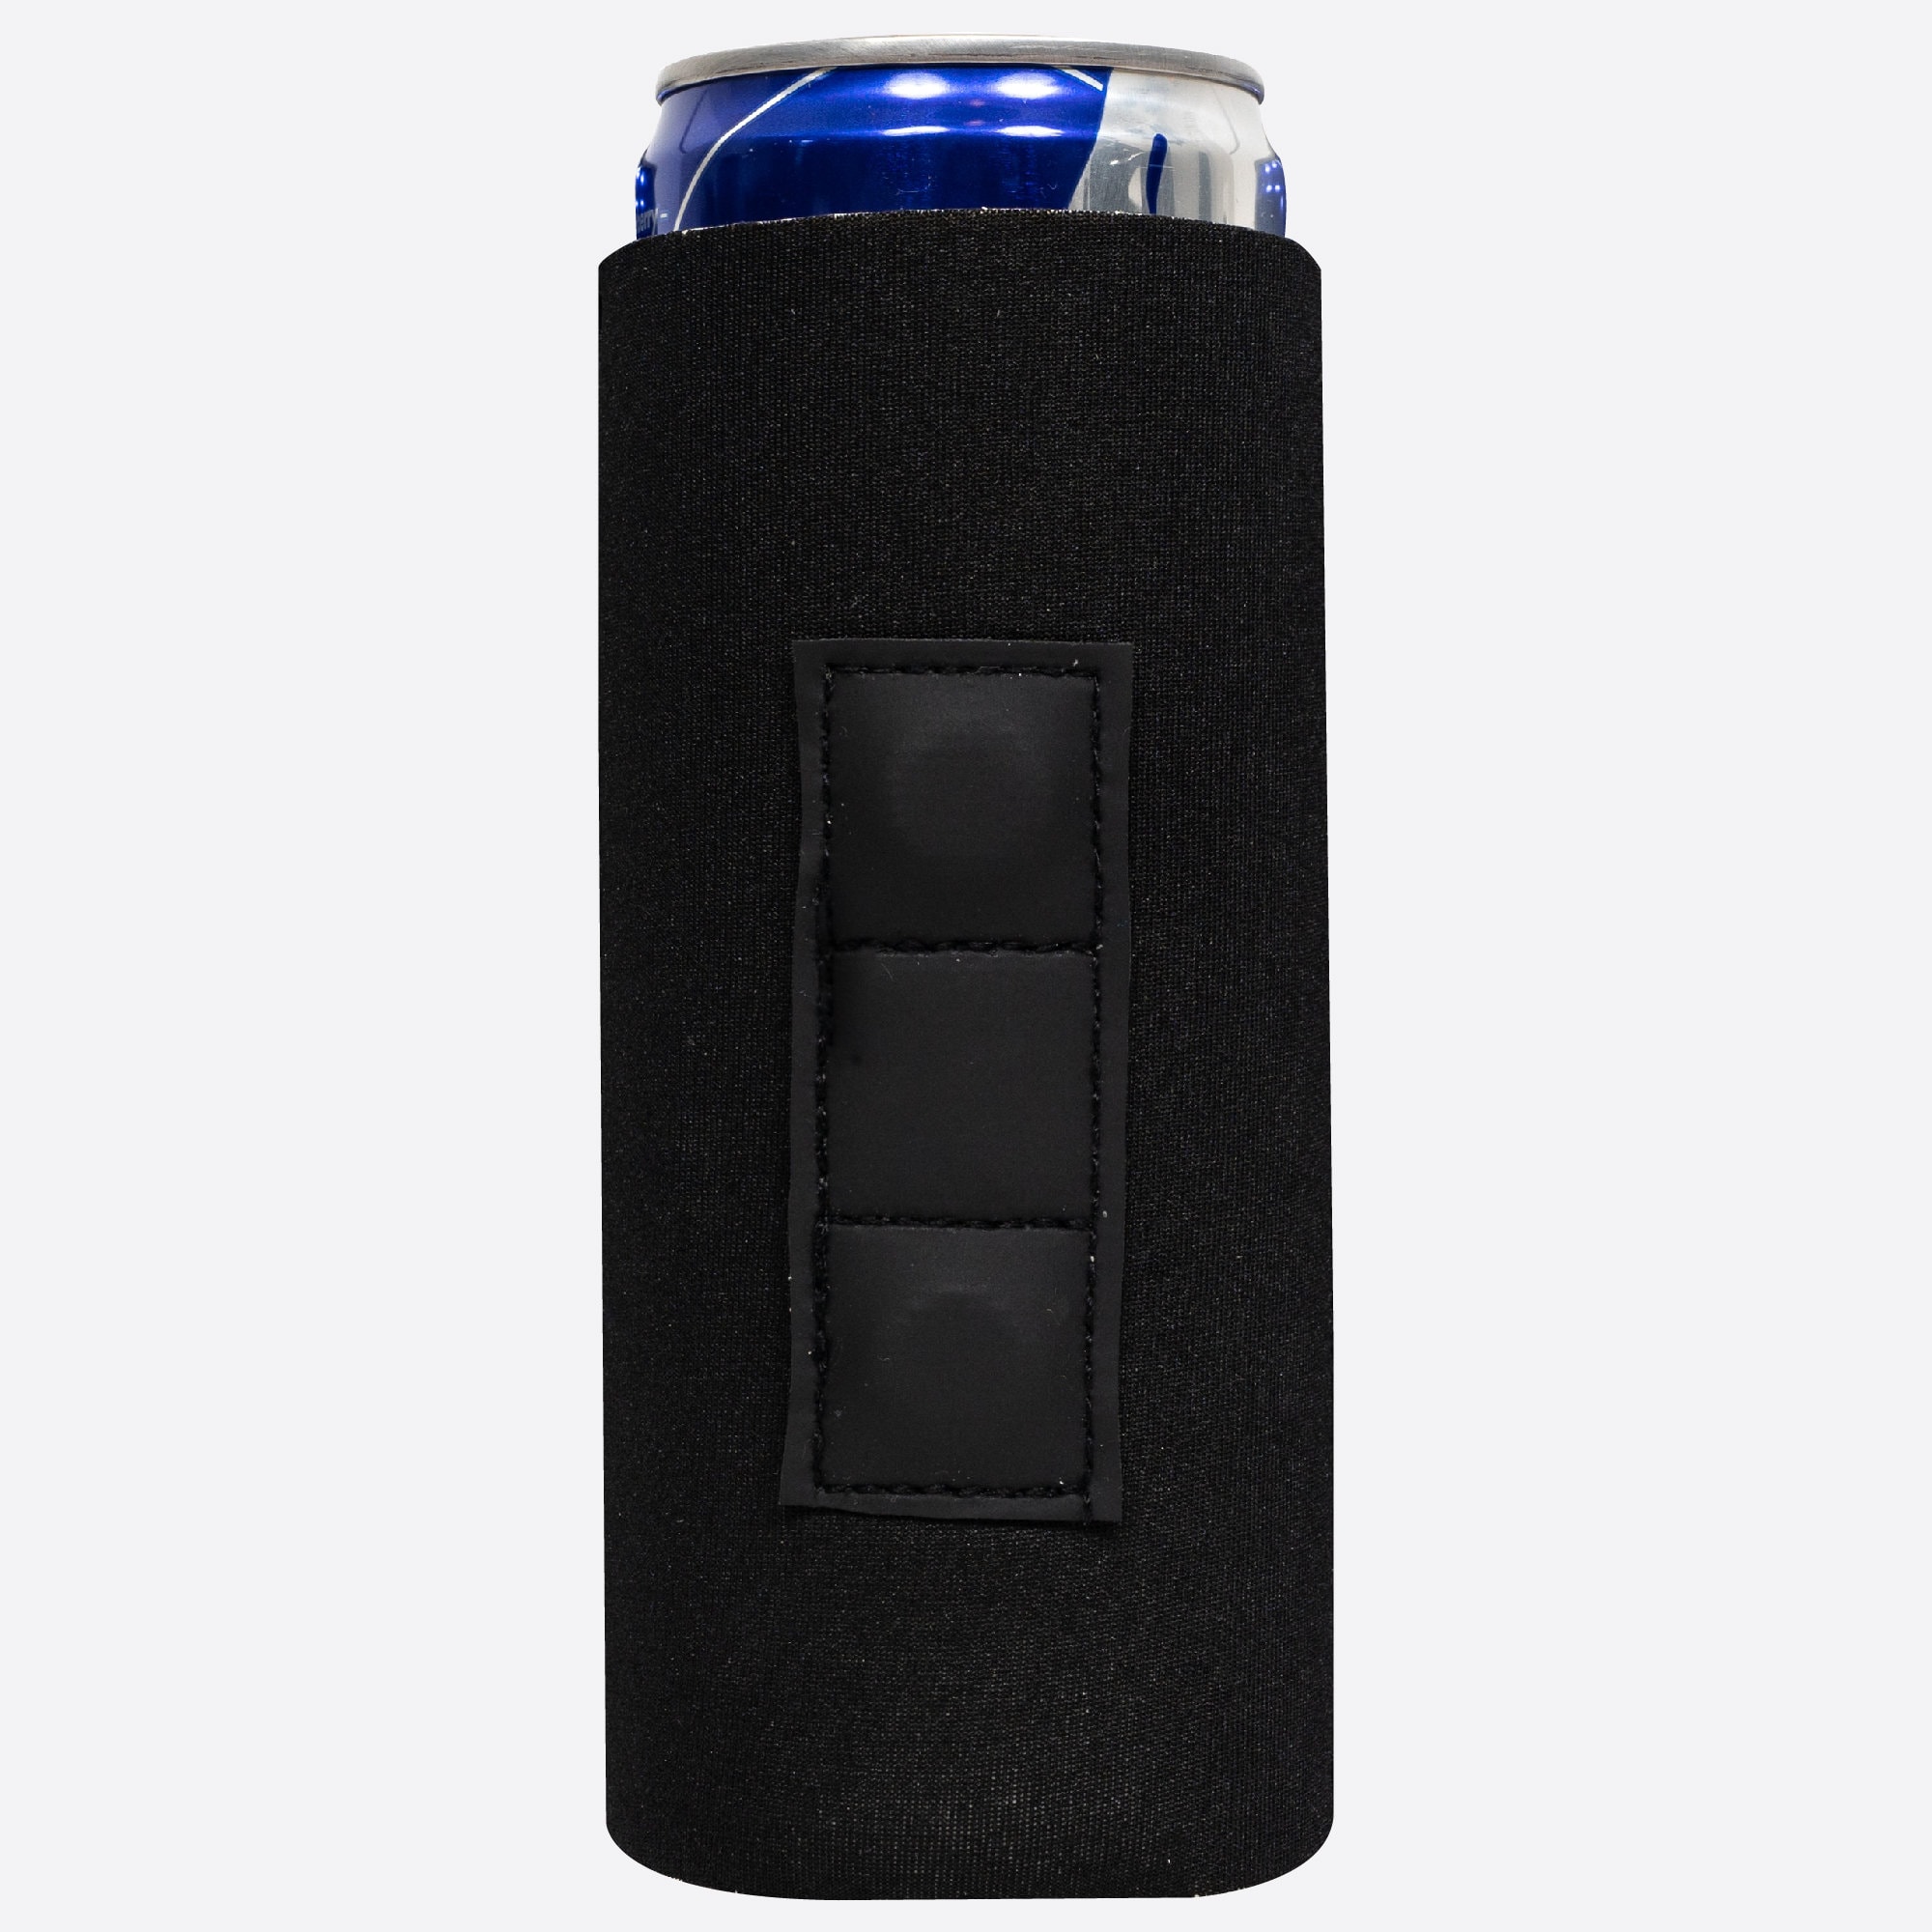 Navy Dog Head W Universal Stainless Koozie - Wingate Outfitters